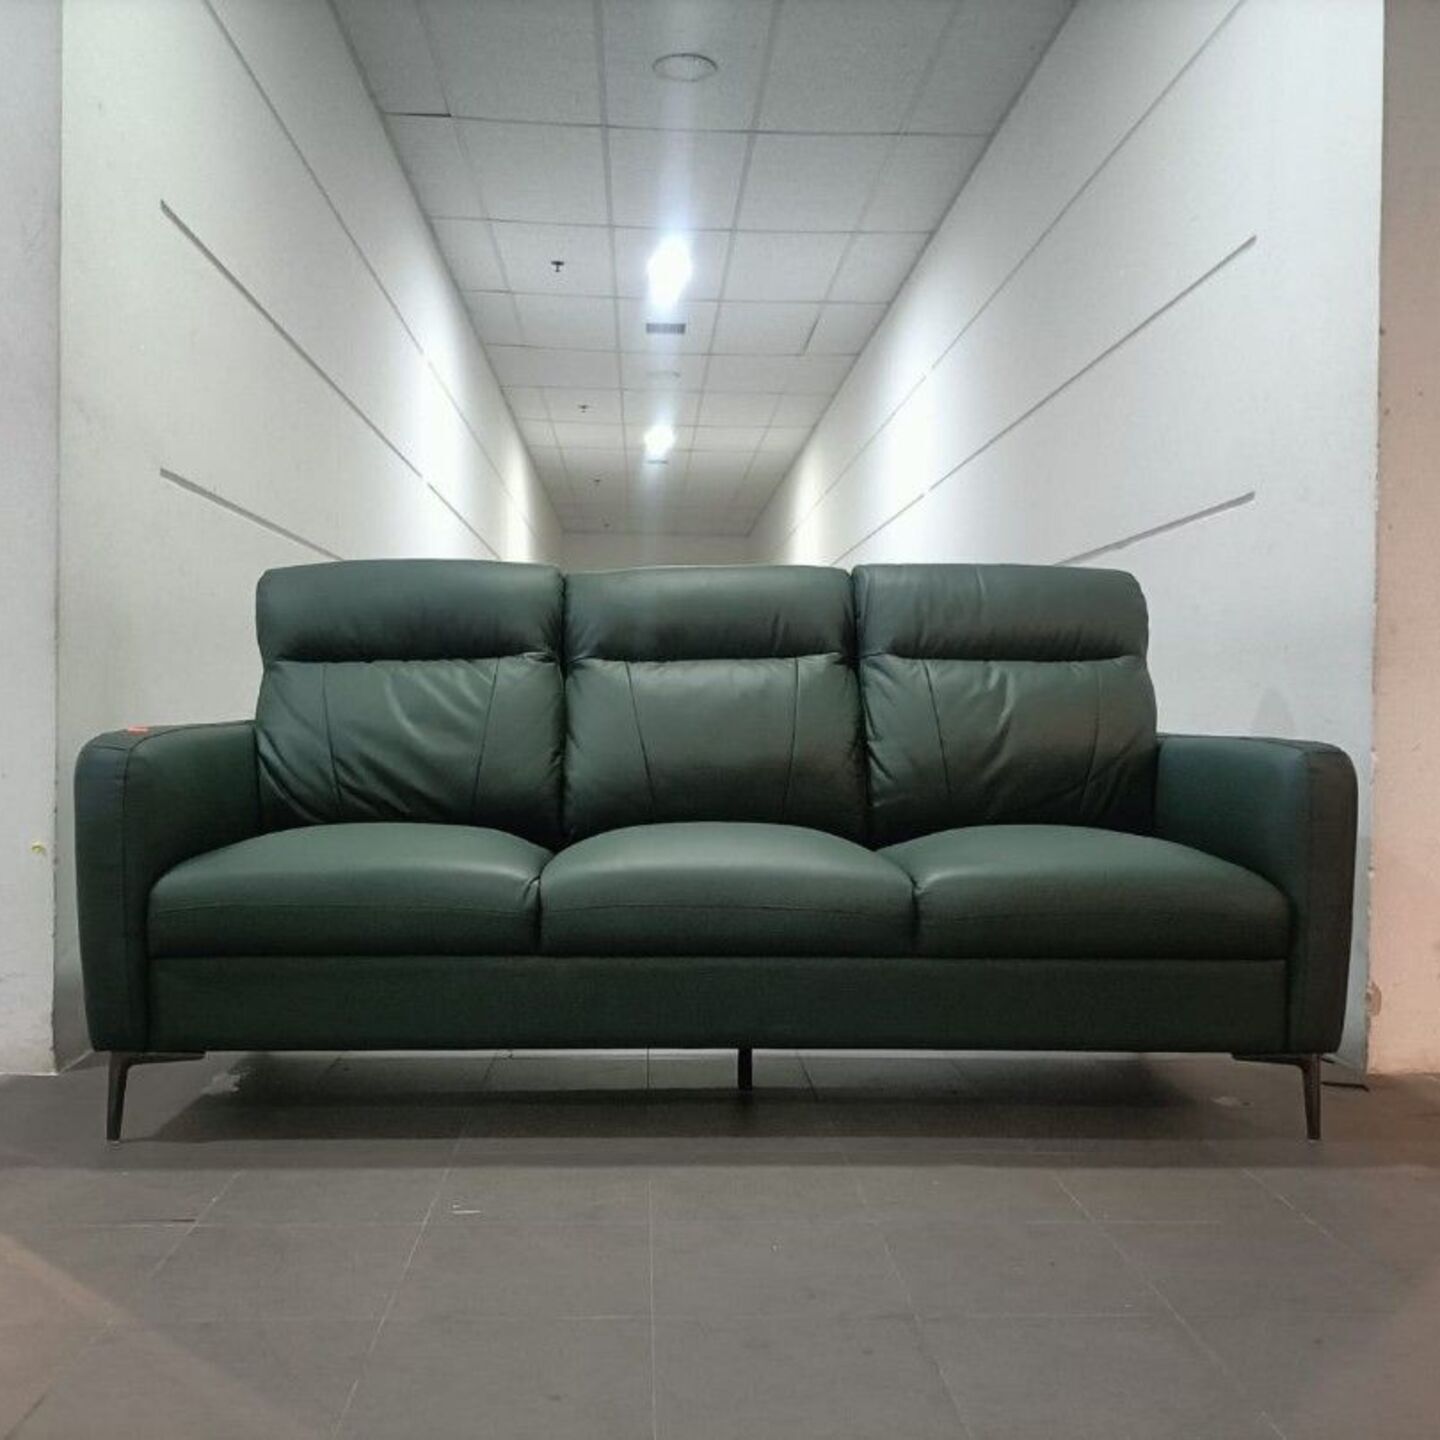 GOTTFRIED Genuine Leather 3 Seater Sofa in GREEN